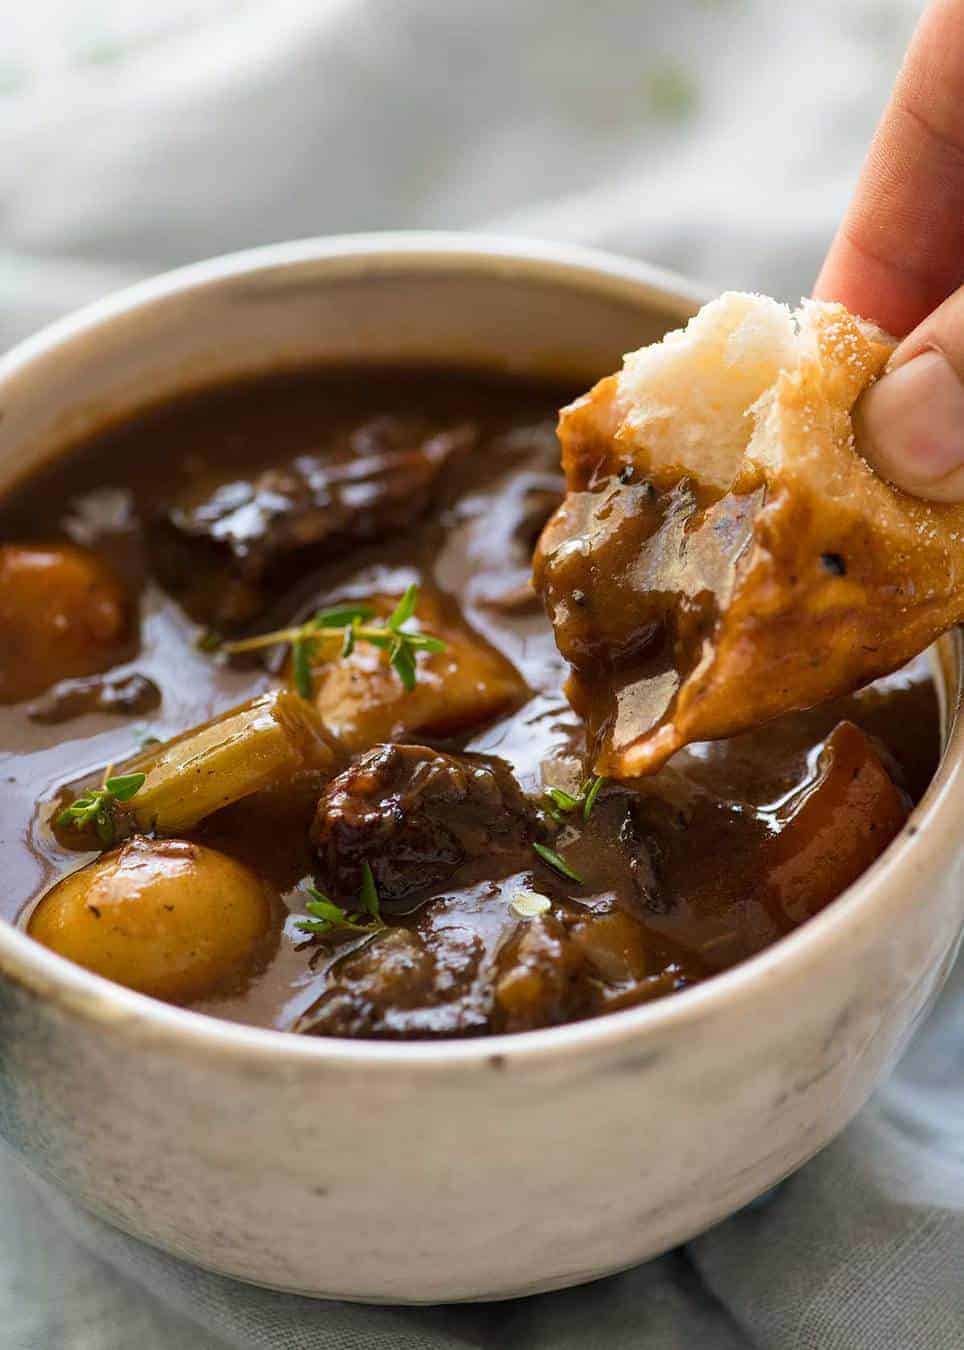 Close up photo of a piece of bread being dunked into Beef Stew with Potatoes and Carrots. The bread shows how thick the gravy sauce is./